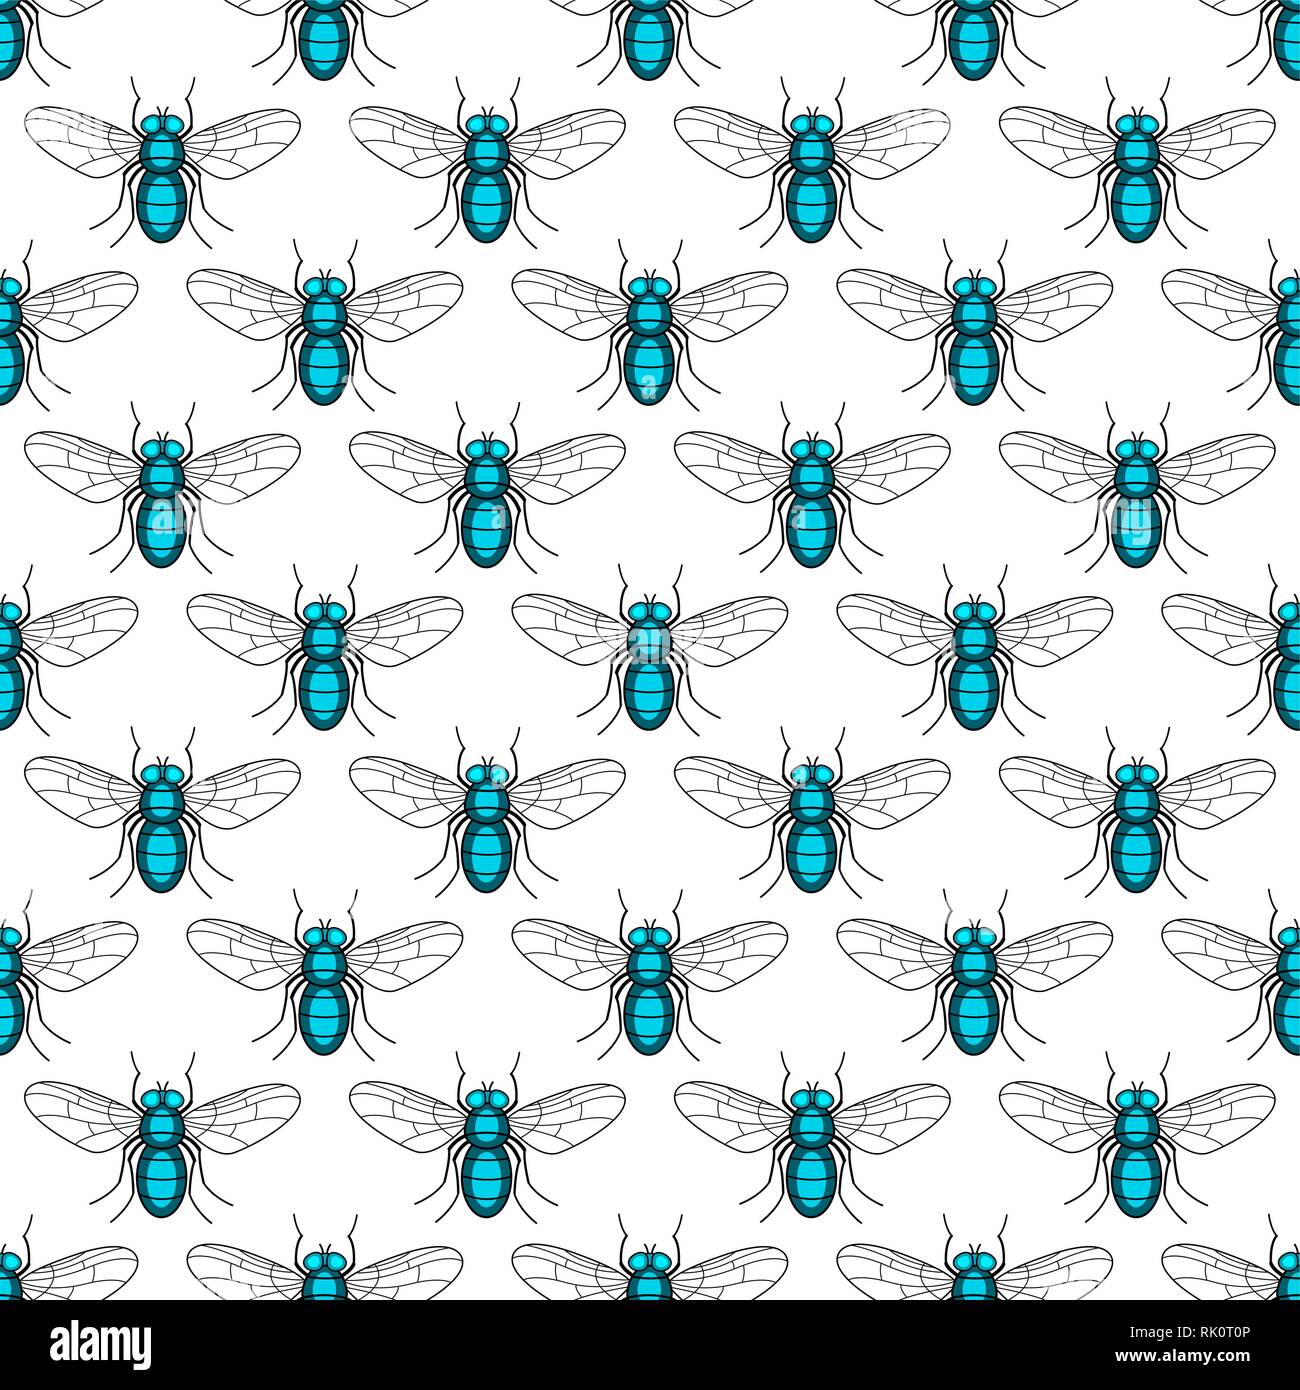 Seamless pattern of the fly insects Stock Vector